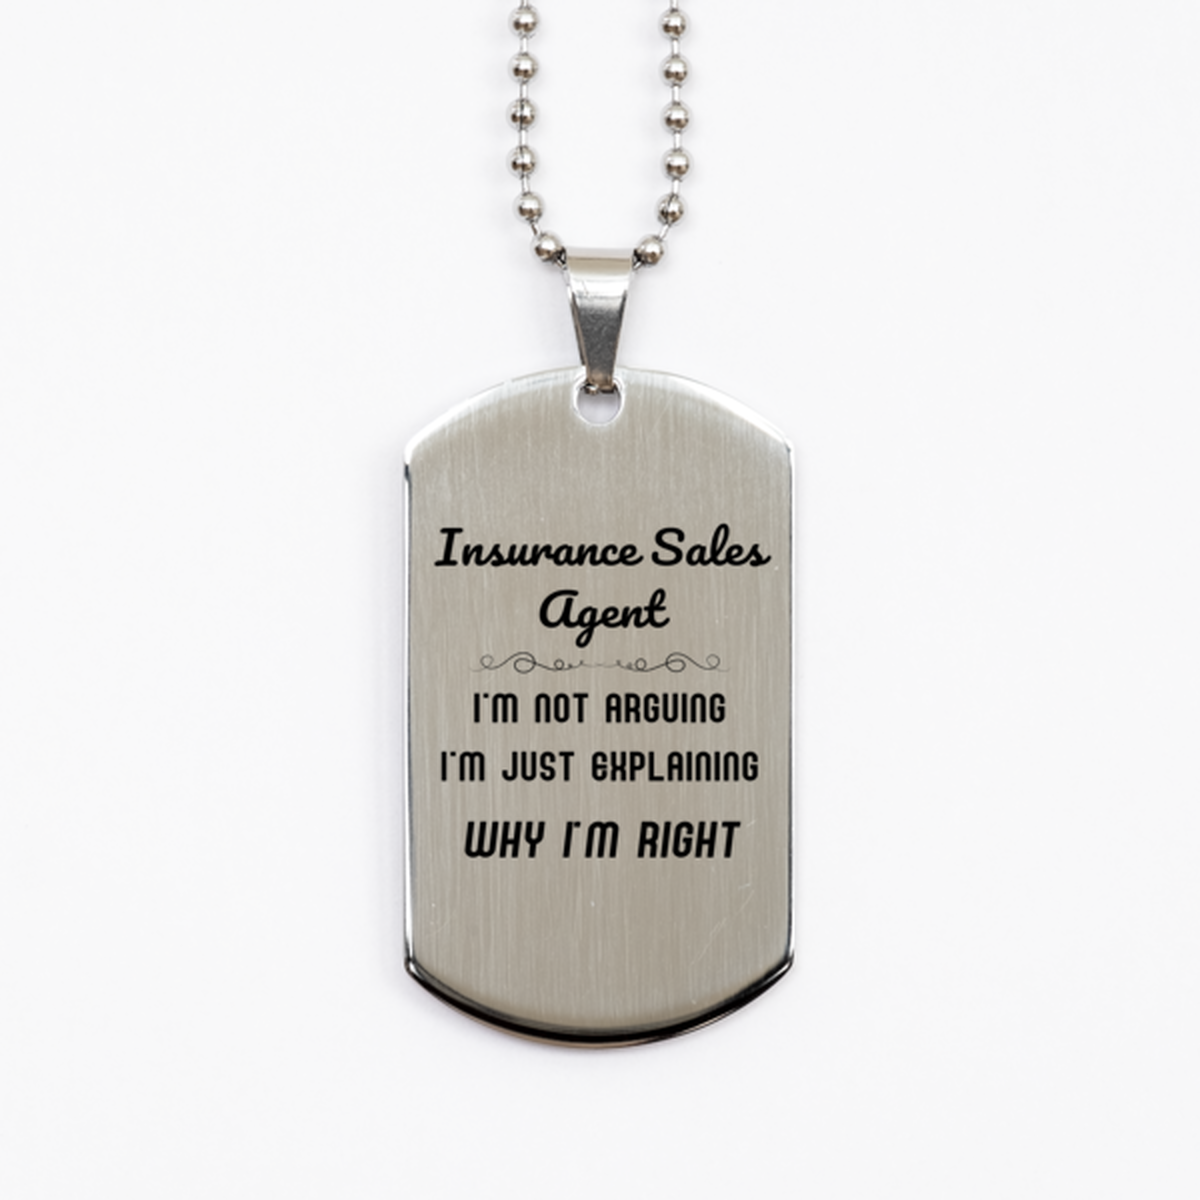 Insurance Sales Agent I'm not Arguing. I'm Just Explaining Why I'm RIGHT Silver Dog Tag, Funny Saying Quote Insurance Sales Agent Gifts For Insurance Sales Agent Graduation Birthday Christmas Gifts for Men Women Coworker